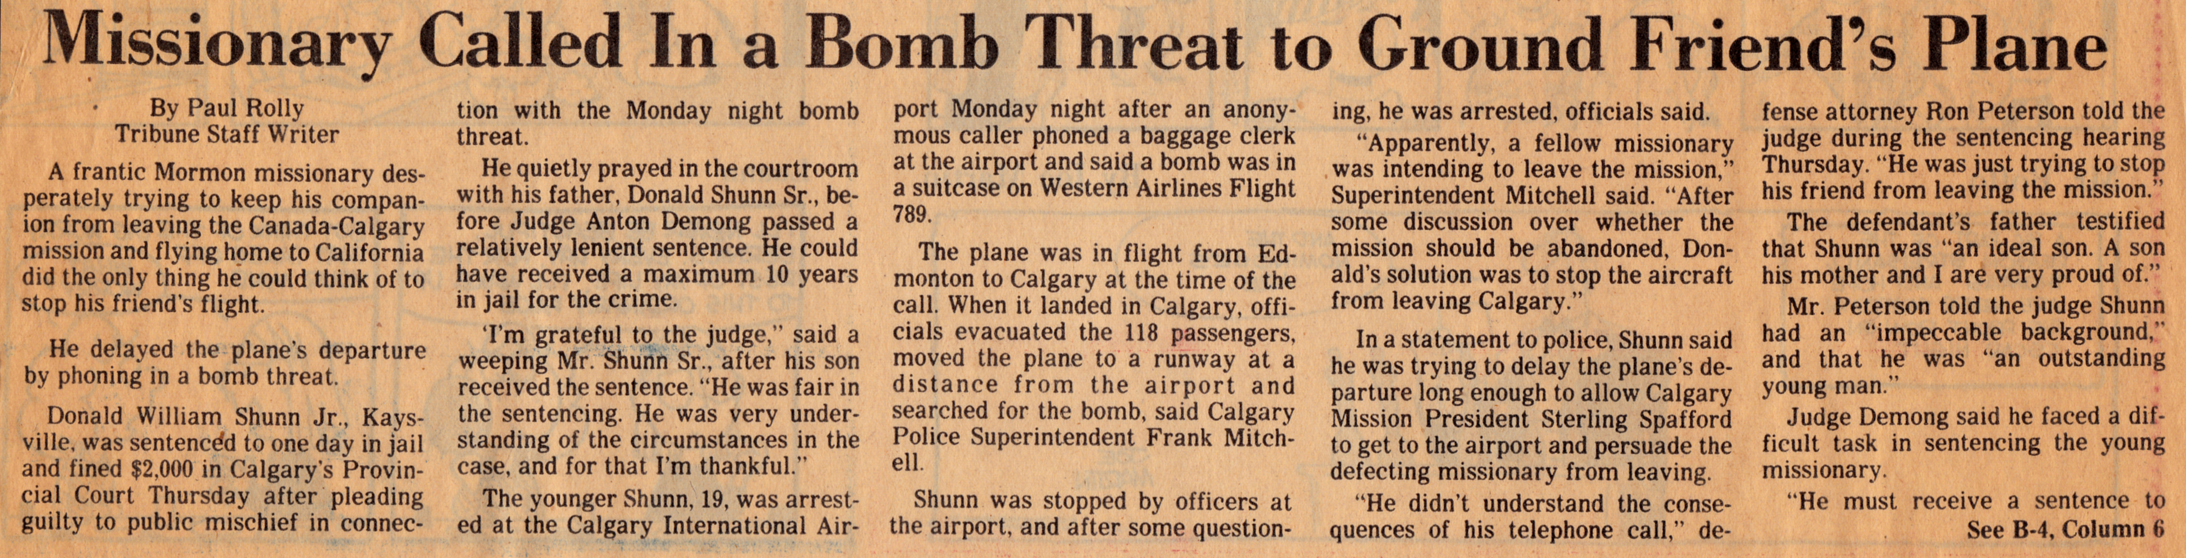 Salt Lake Tribune: Missionary Called In a Bomb Threat to Ground Friend's Plane - click to view - mousewheel to zoom